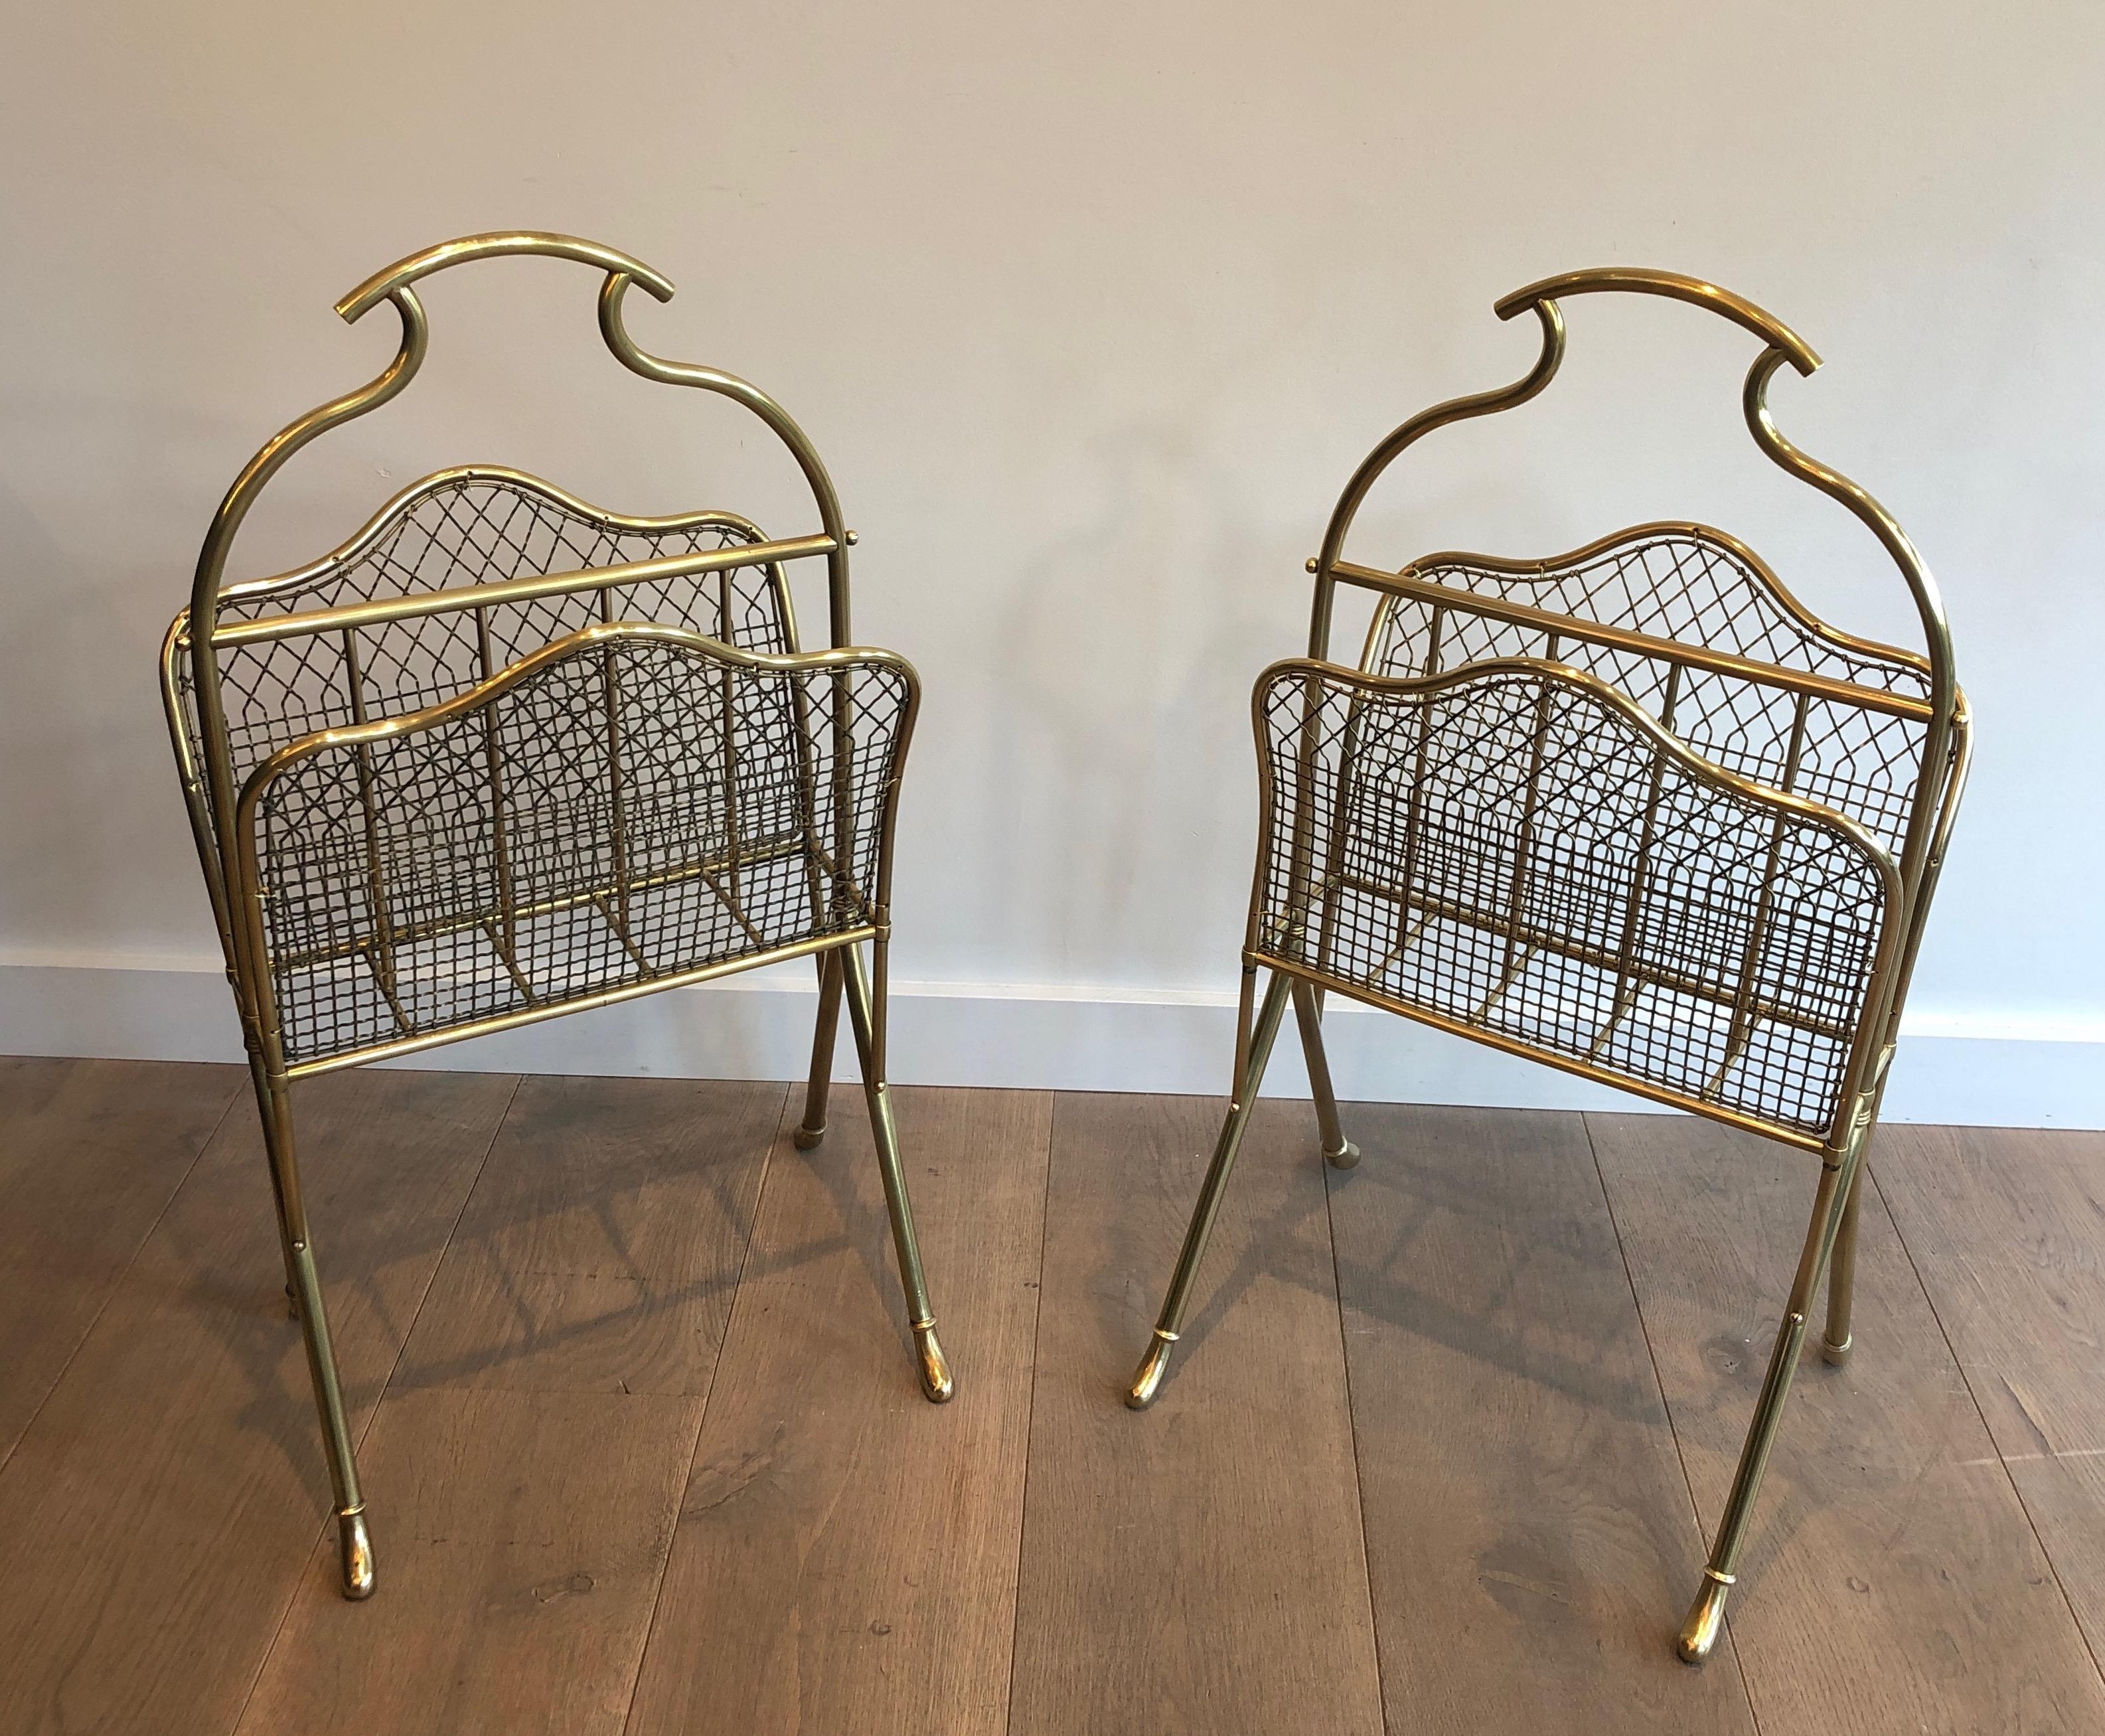 This rare pair of neoclassical style magazine racks is made of brass. This is a work attributed to famous French designer Maison Jansen. circa 1900.